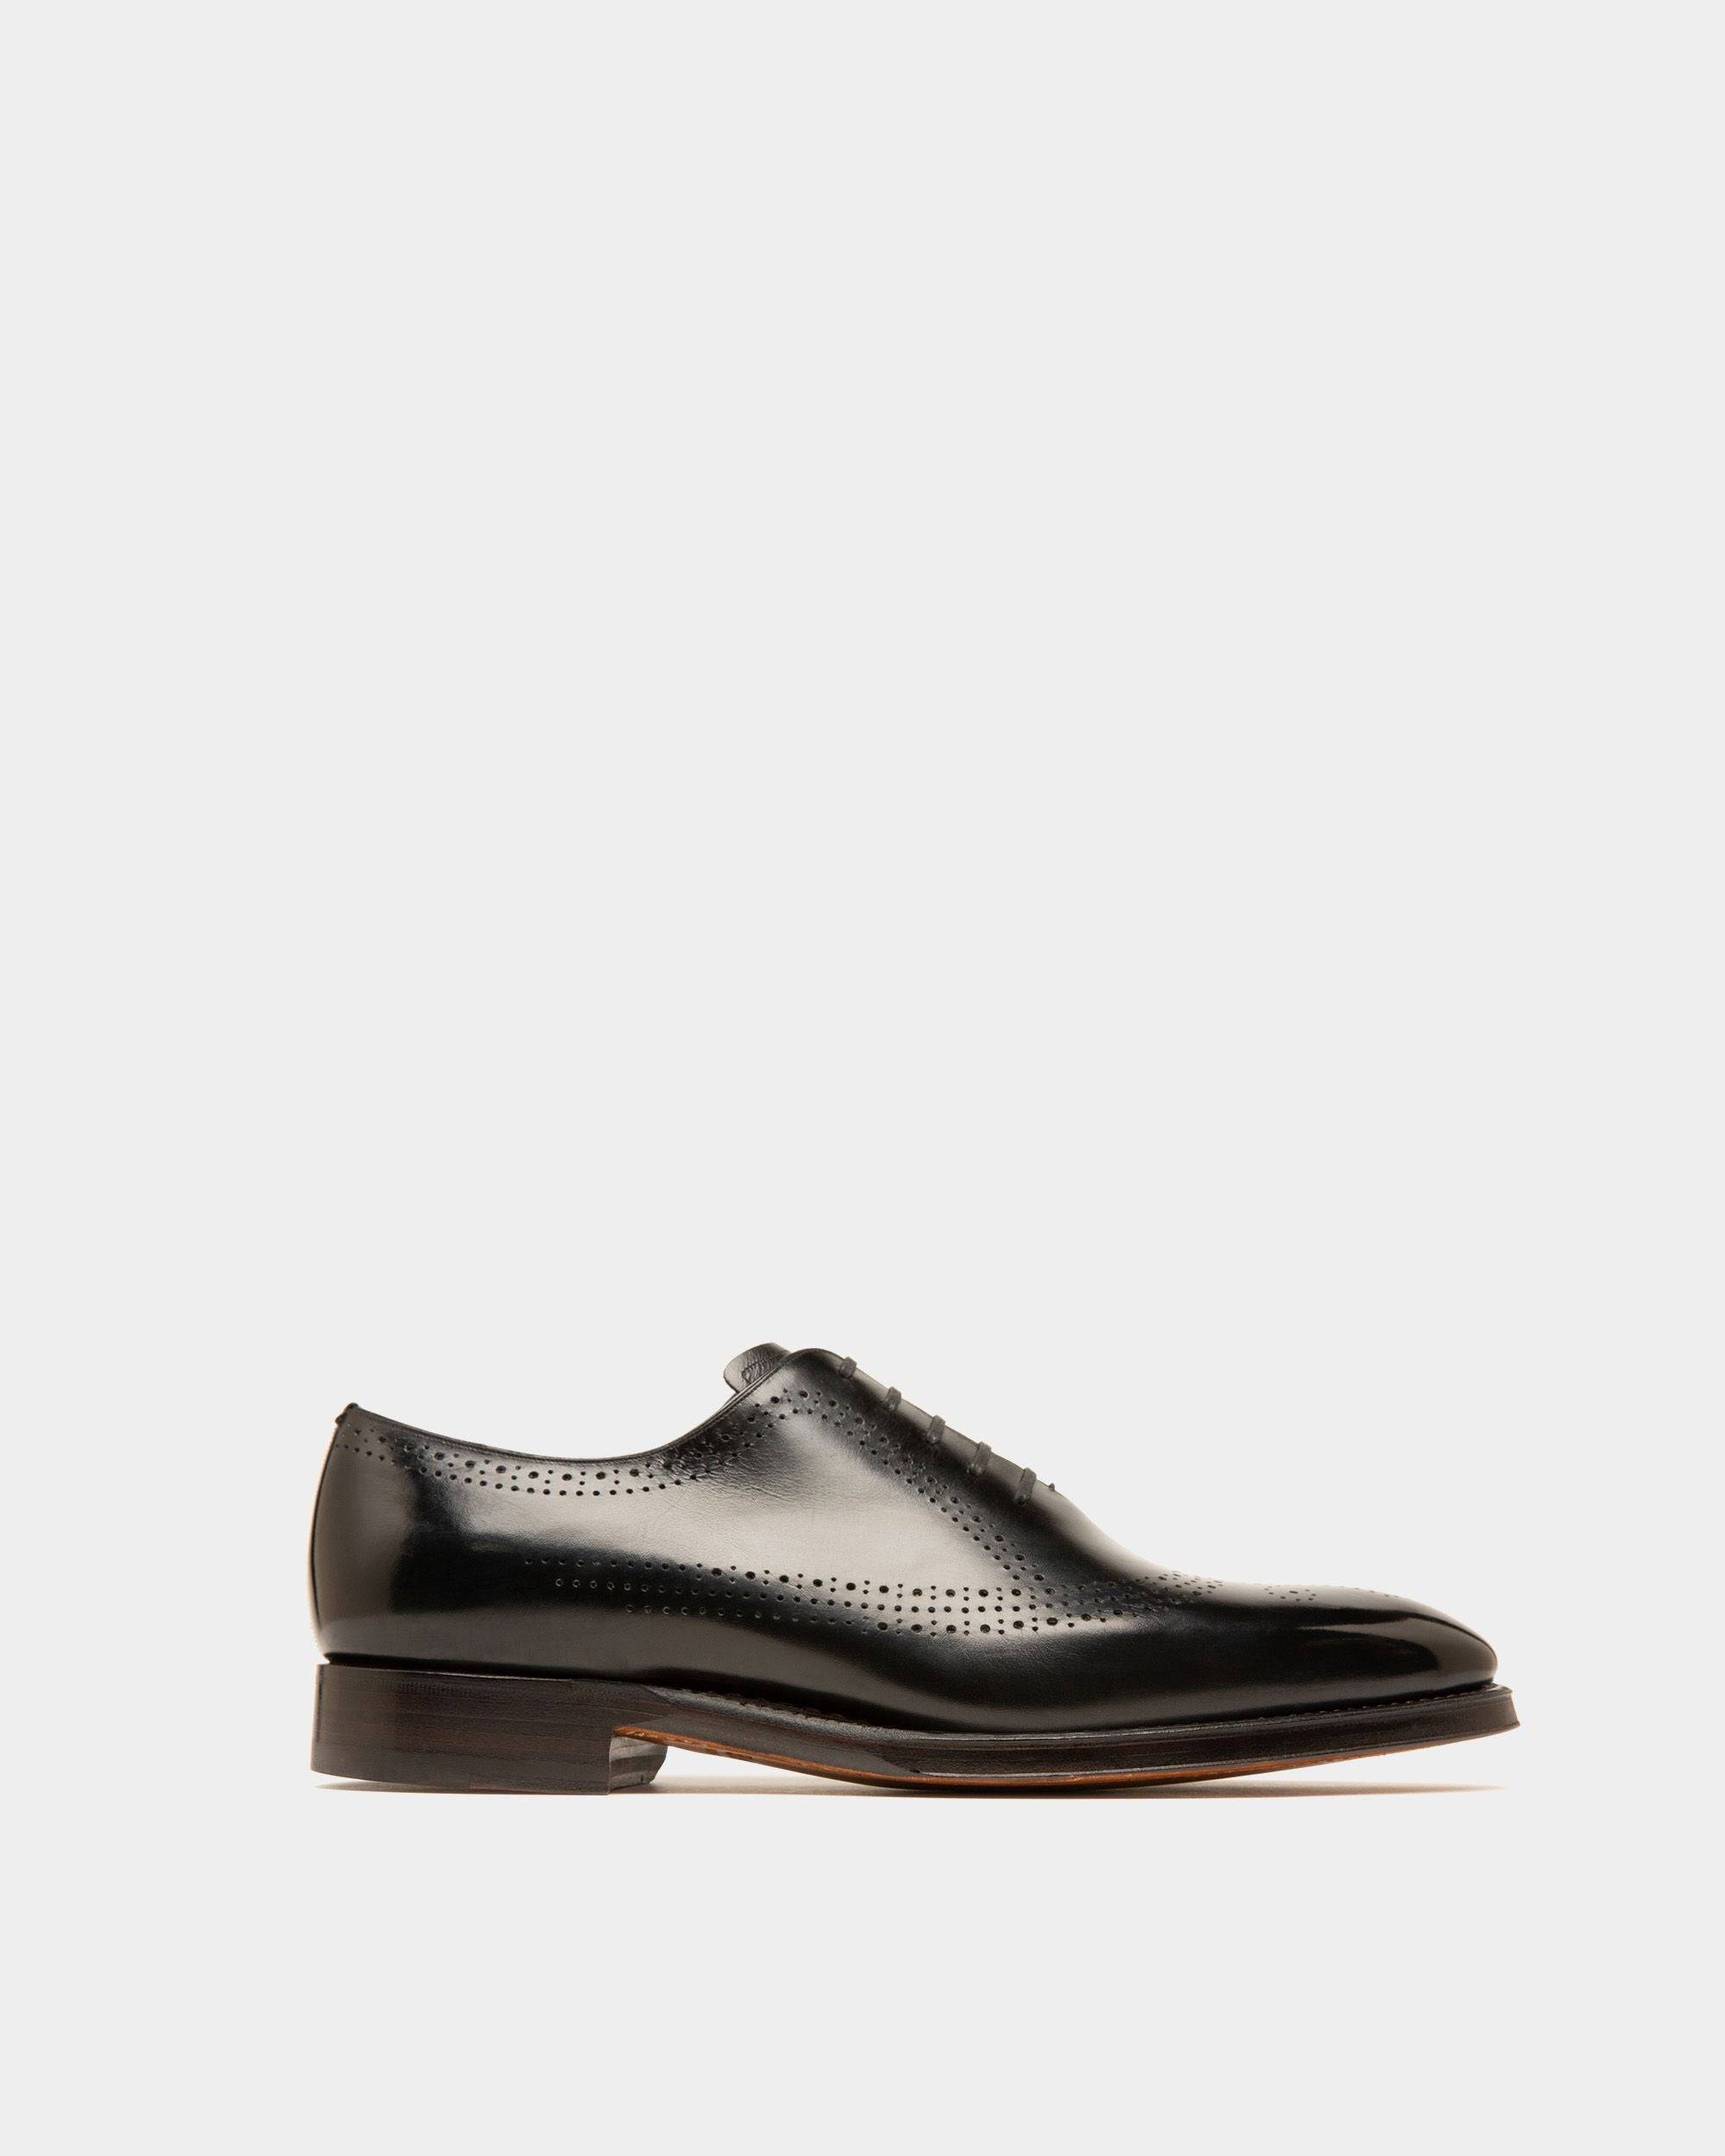 Oxford Shoes In Black Leather - Men's - Bally